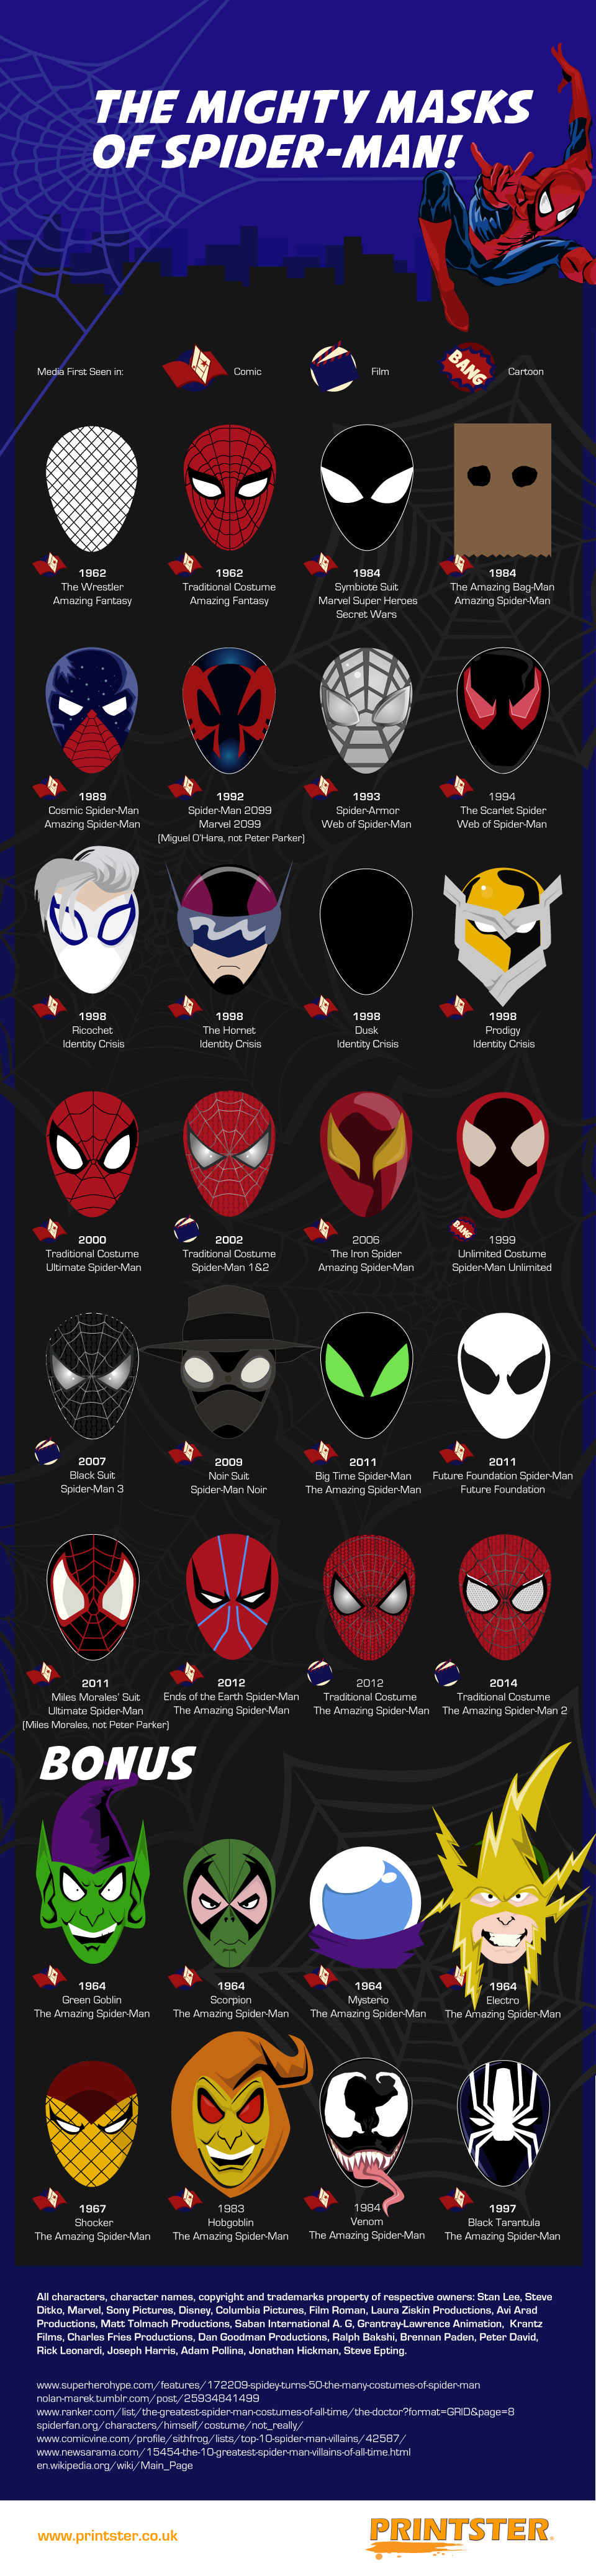 The Mighty Masks of Spider-Man!  Blog